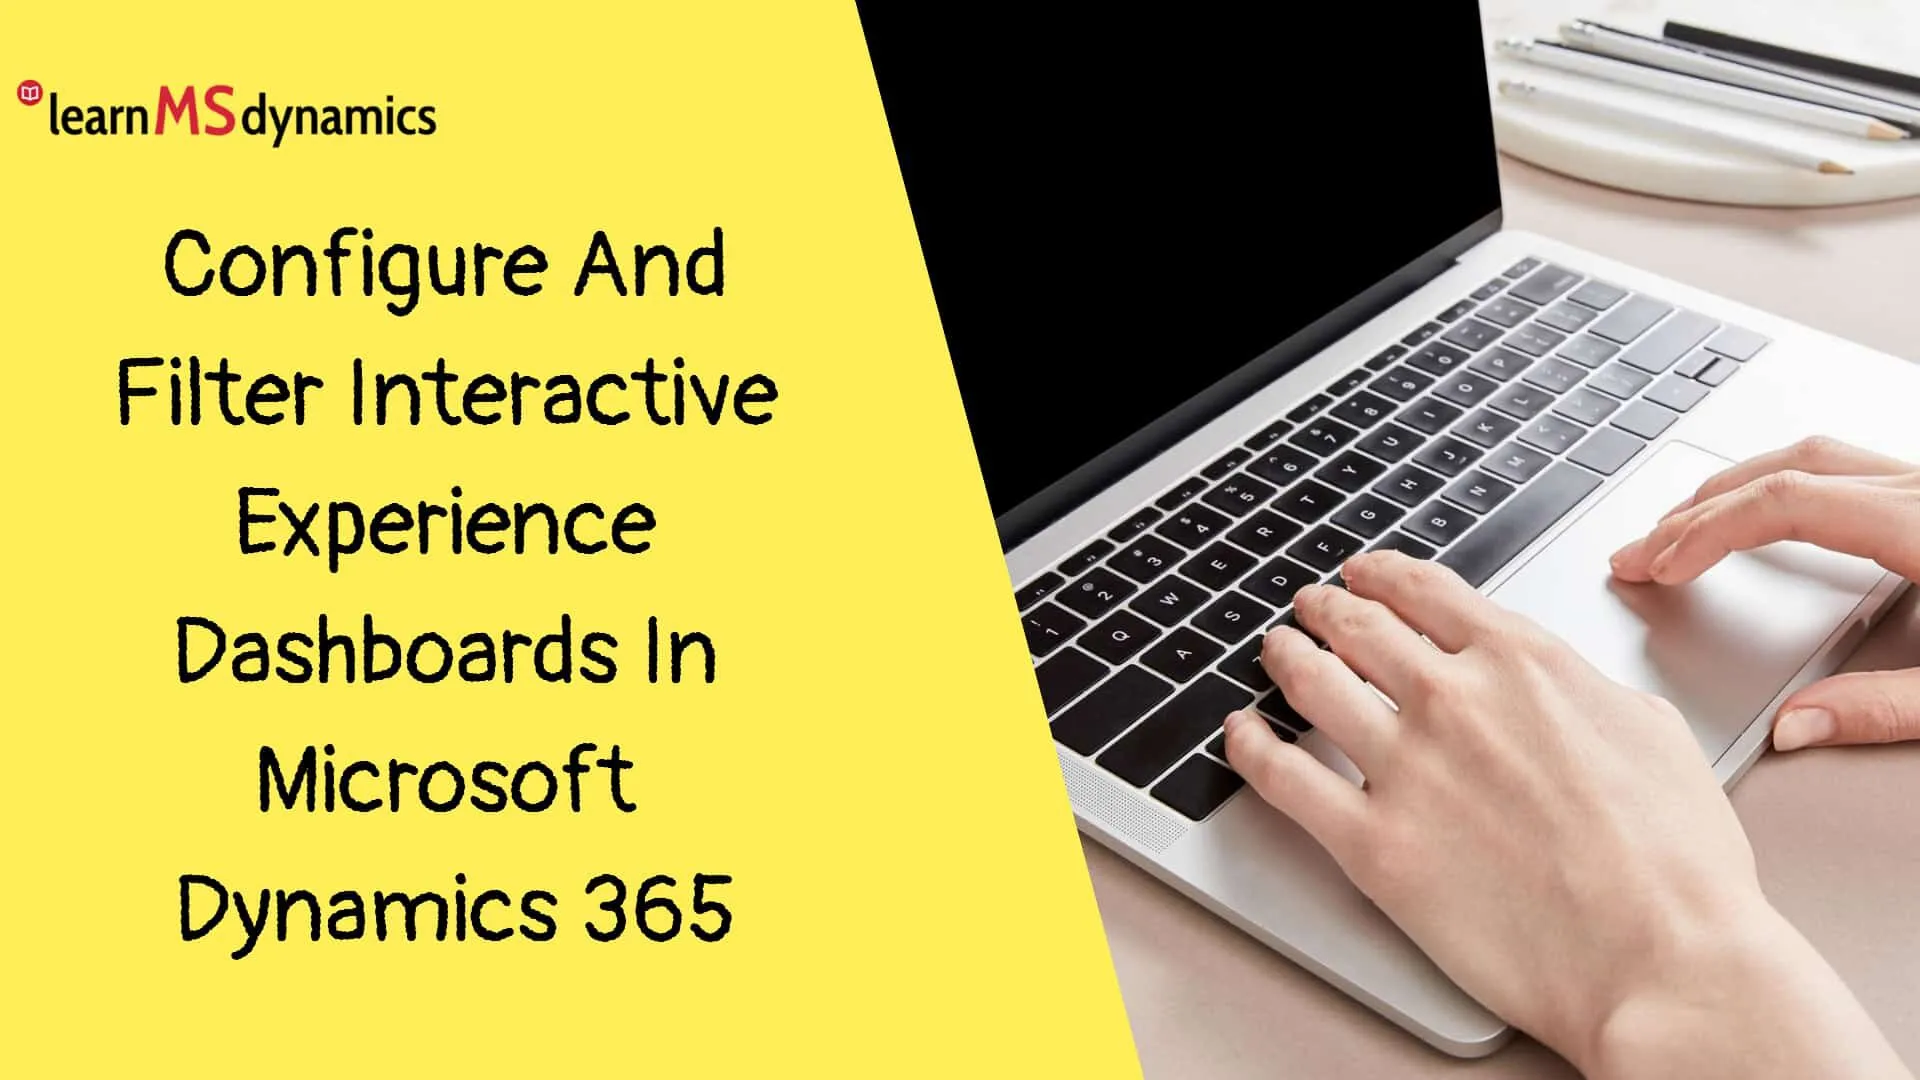 Configure And Filter Interactive Experience Dashboards In Microsoft Dynamics 365